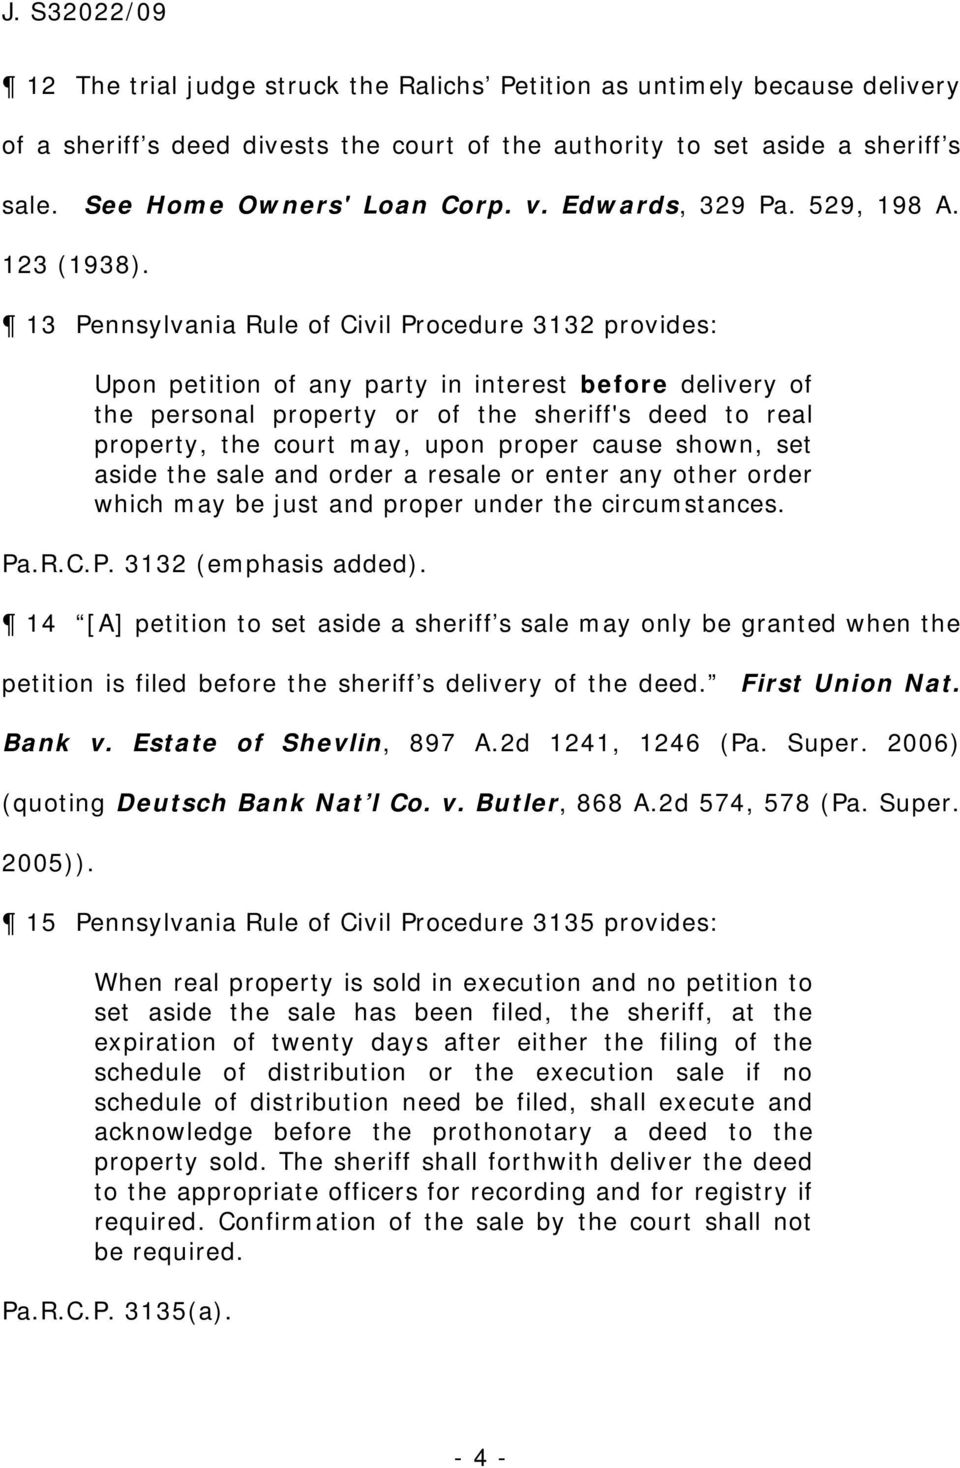 13 Pennsylvania Rule of Civil Procedure 3132 provides Upon petition of any party in interest before delivery of the personal property or of the sheriff's deed to real property, the court may, upon